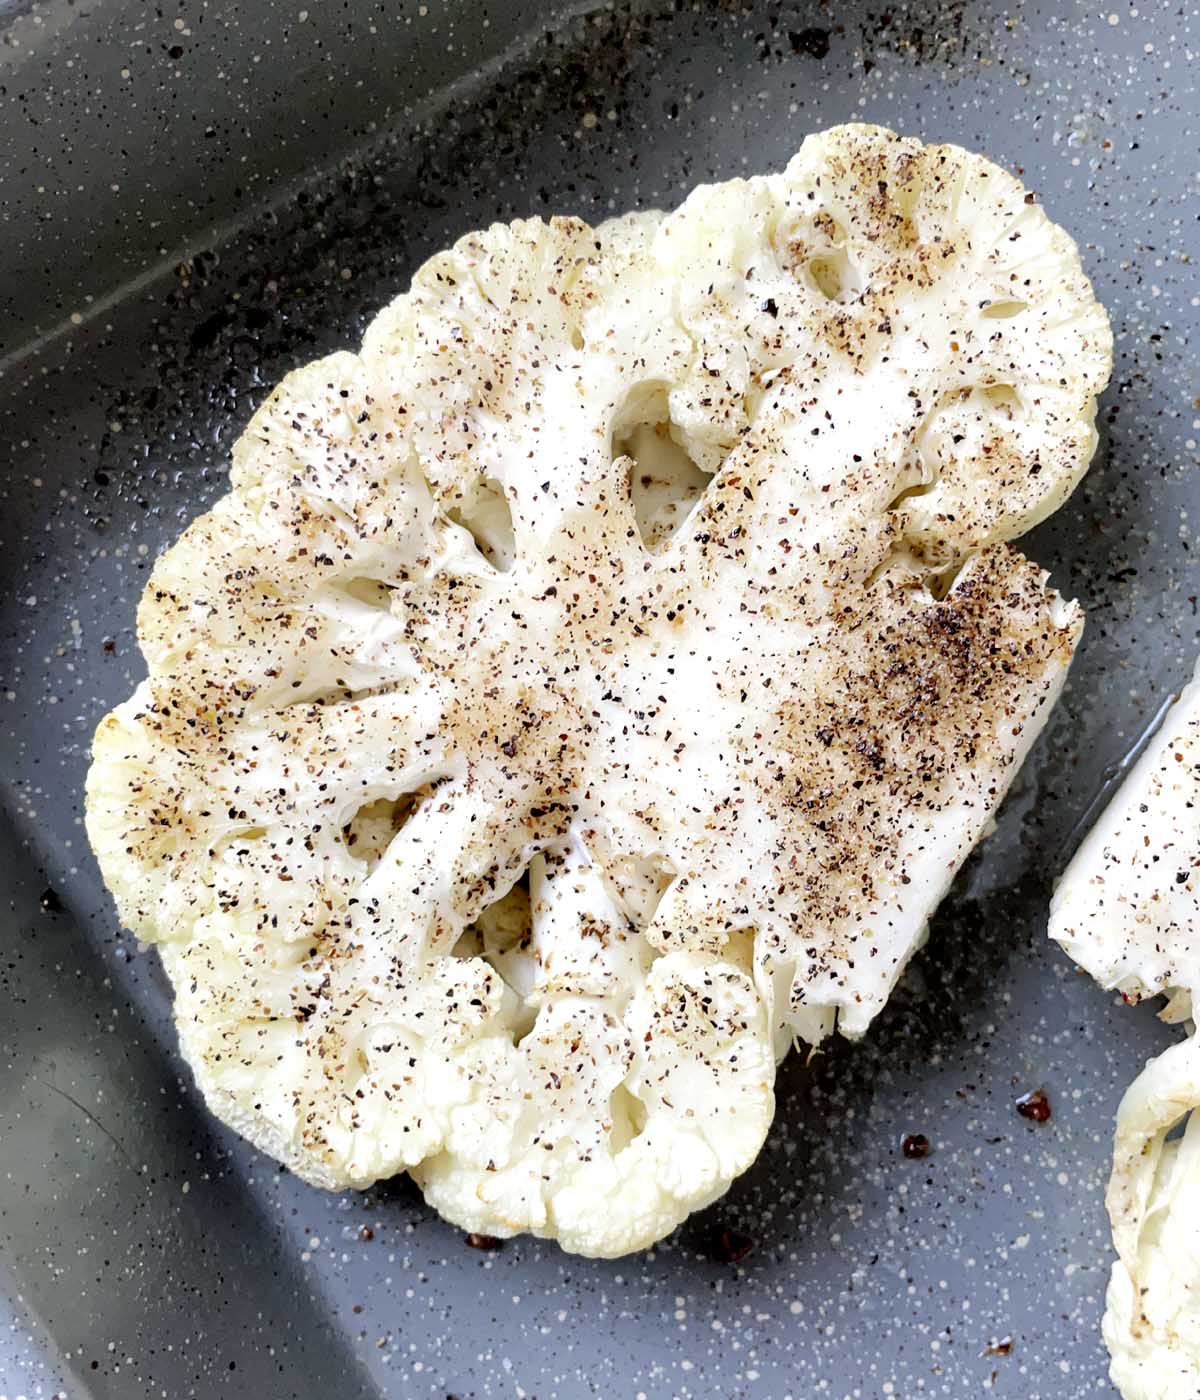 A roasted slice of cauliflower topped with back pepper in a grey roasting pan.